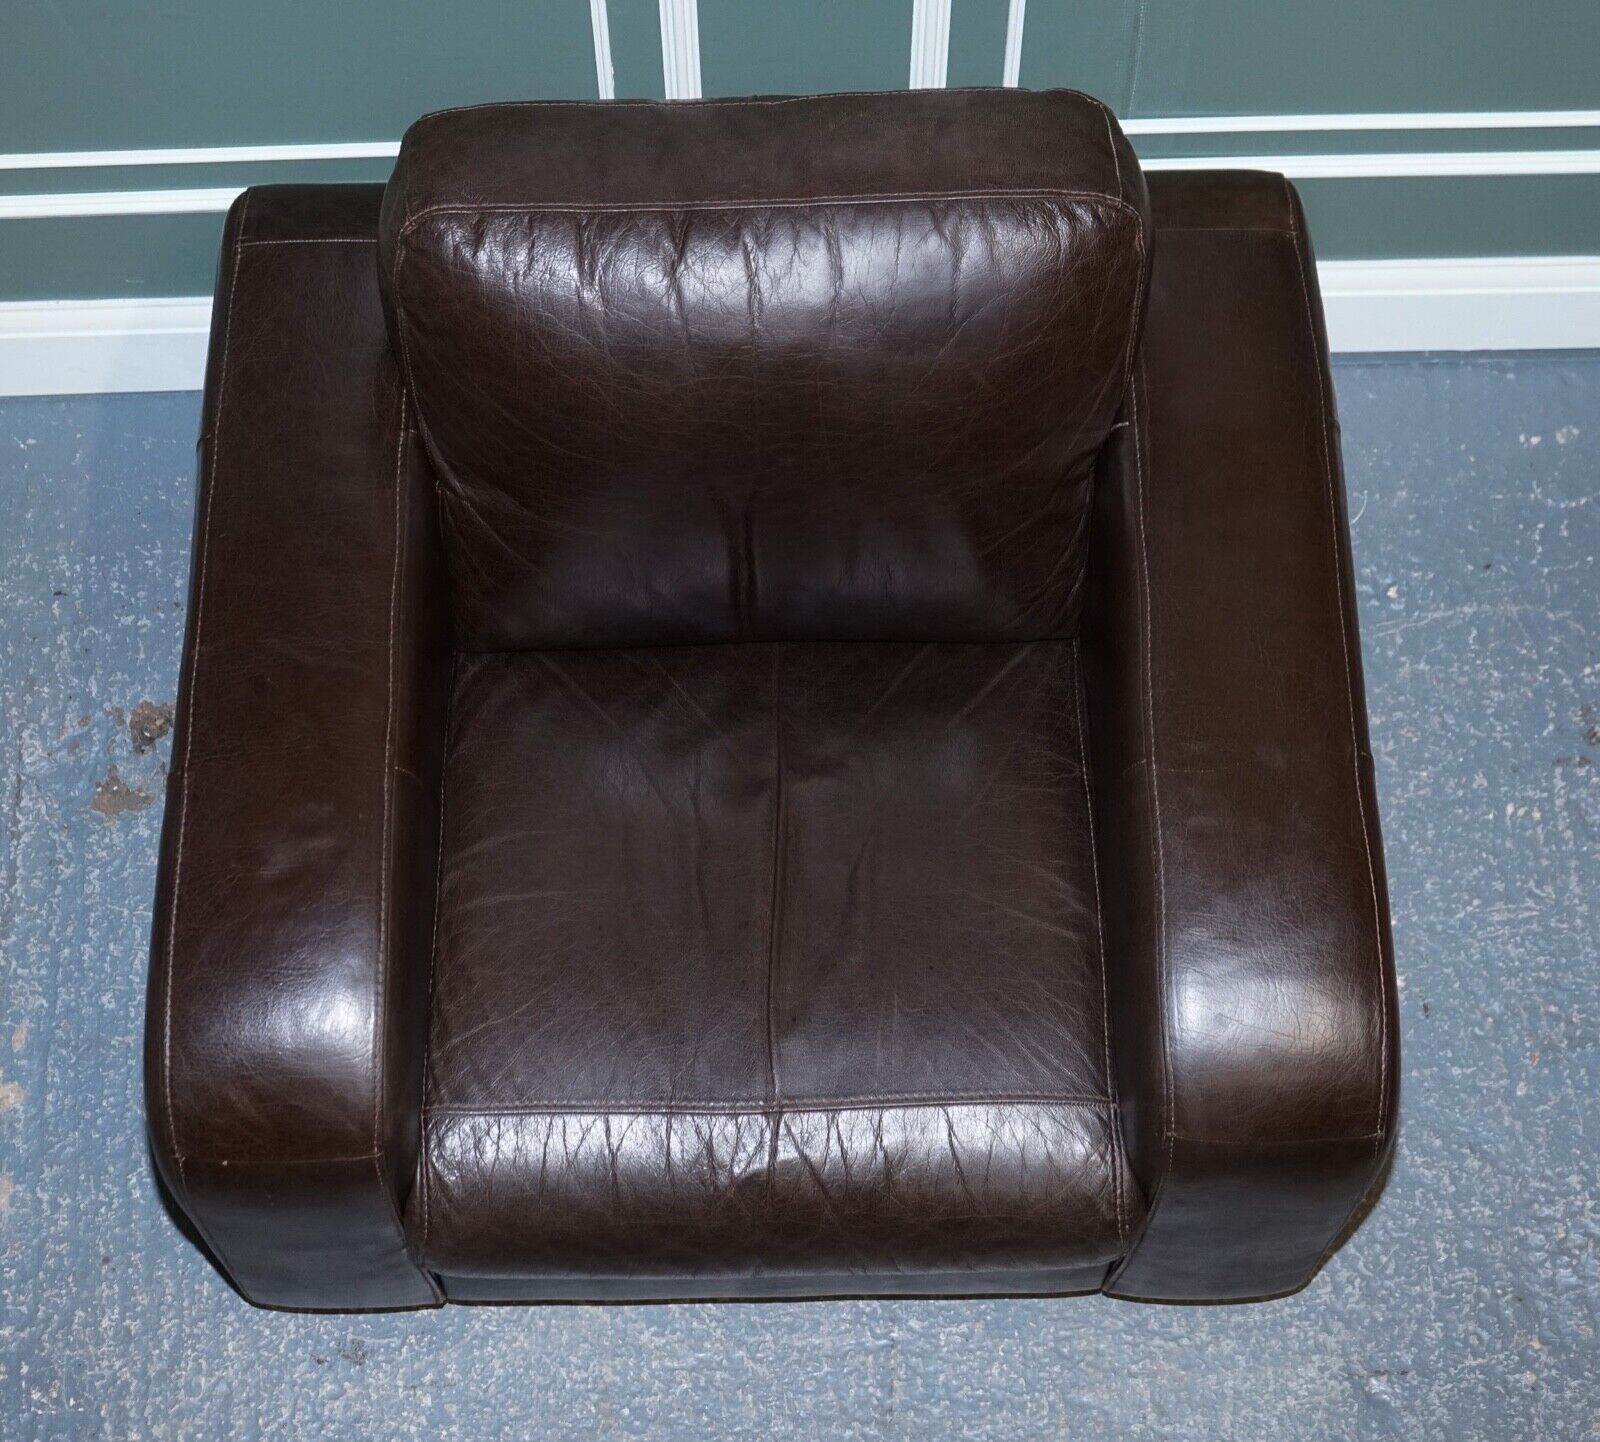 VINTAGE PAIR OF CHOCOLATE BROWN LEATHER ARMCHAIRS BY SOFITALIA